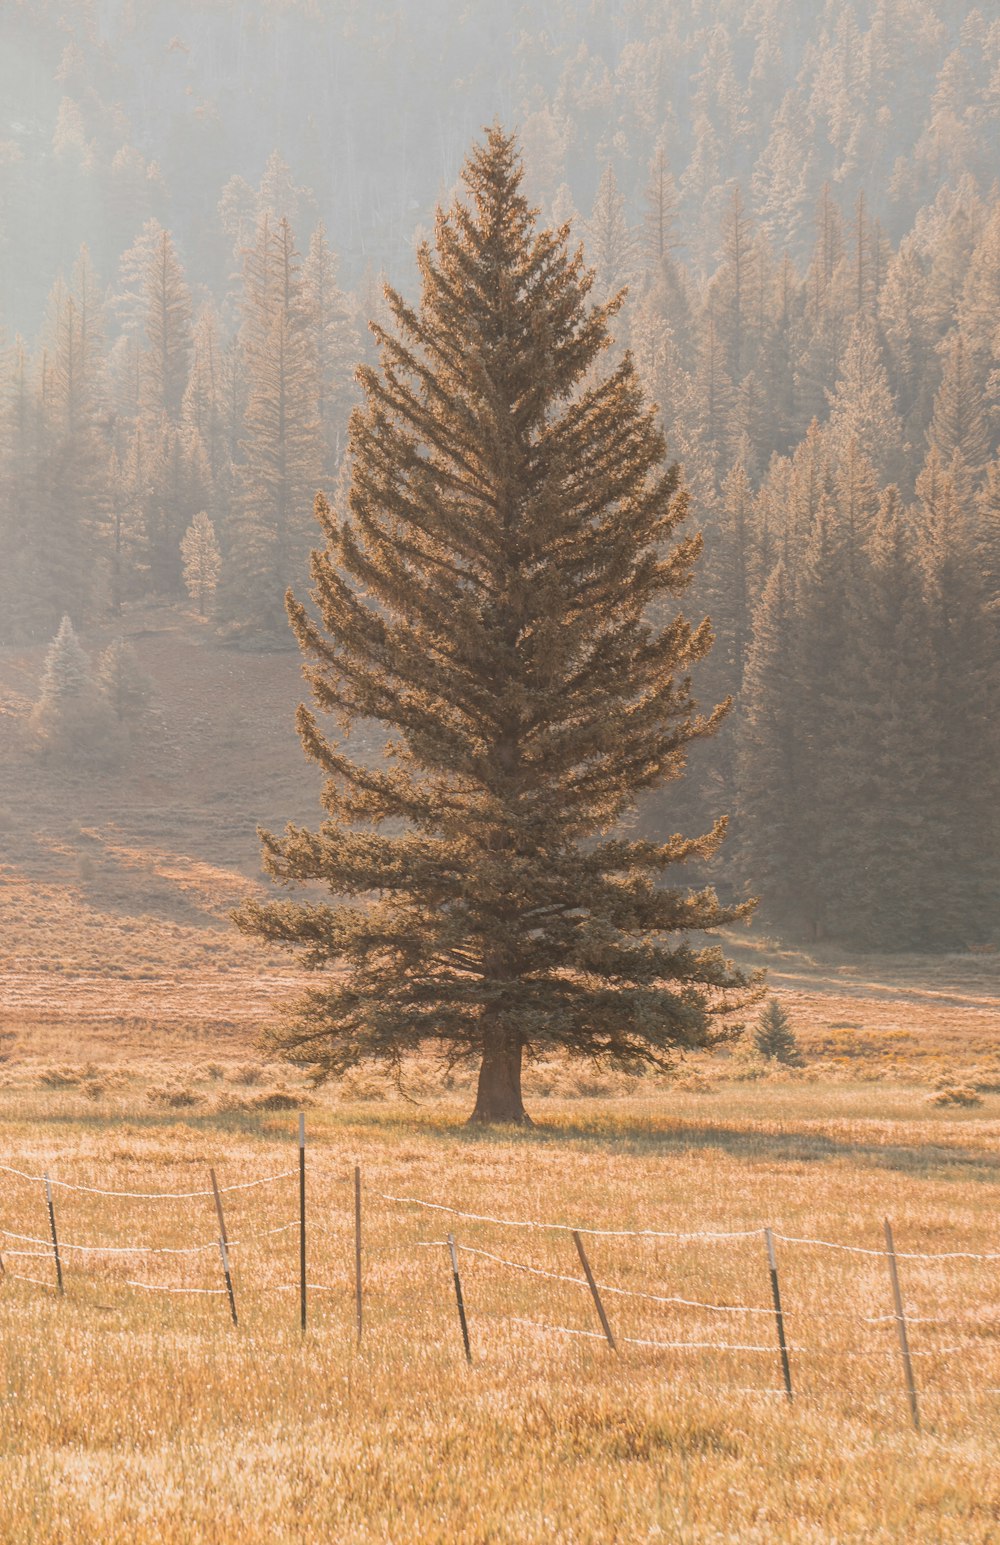 a lone pine tree in a field with mountains in the background